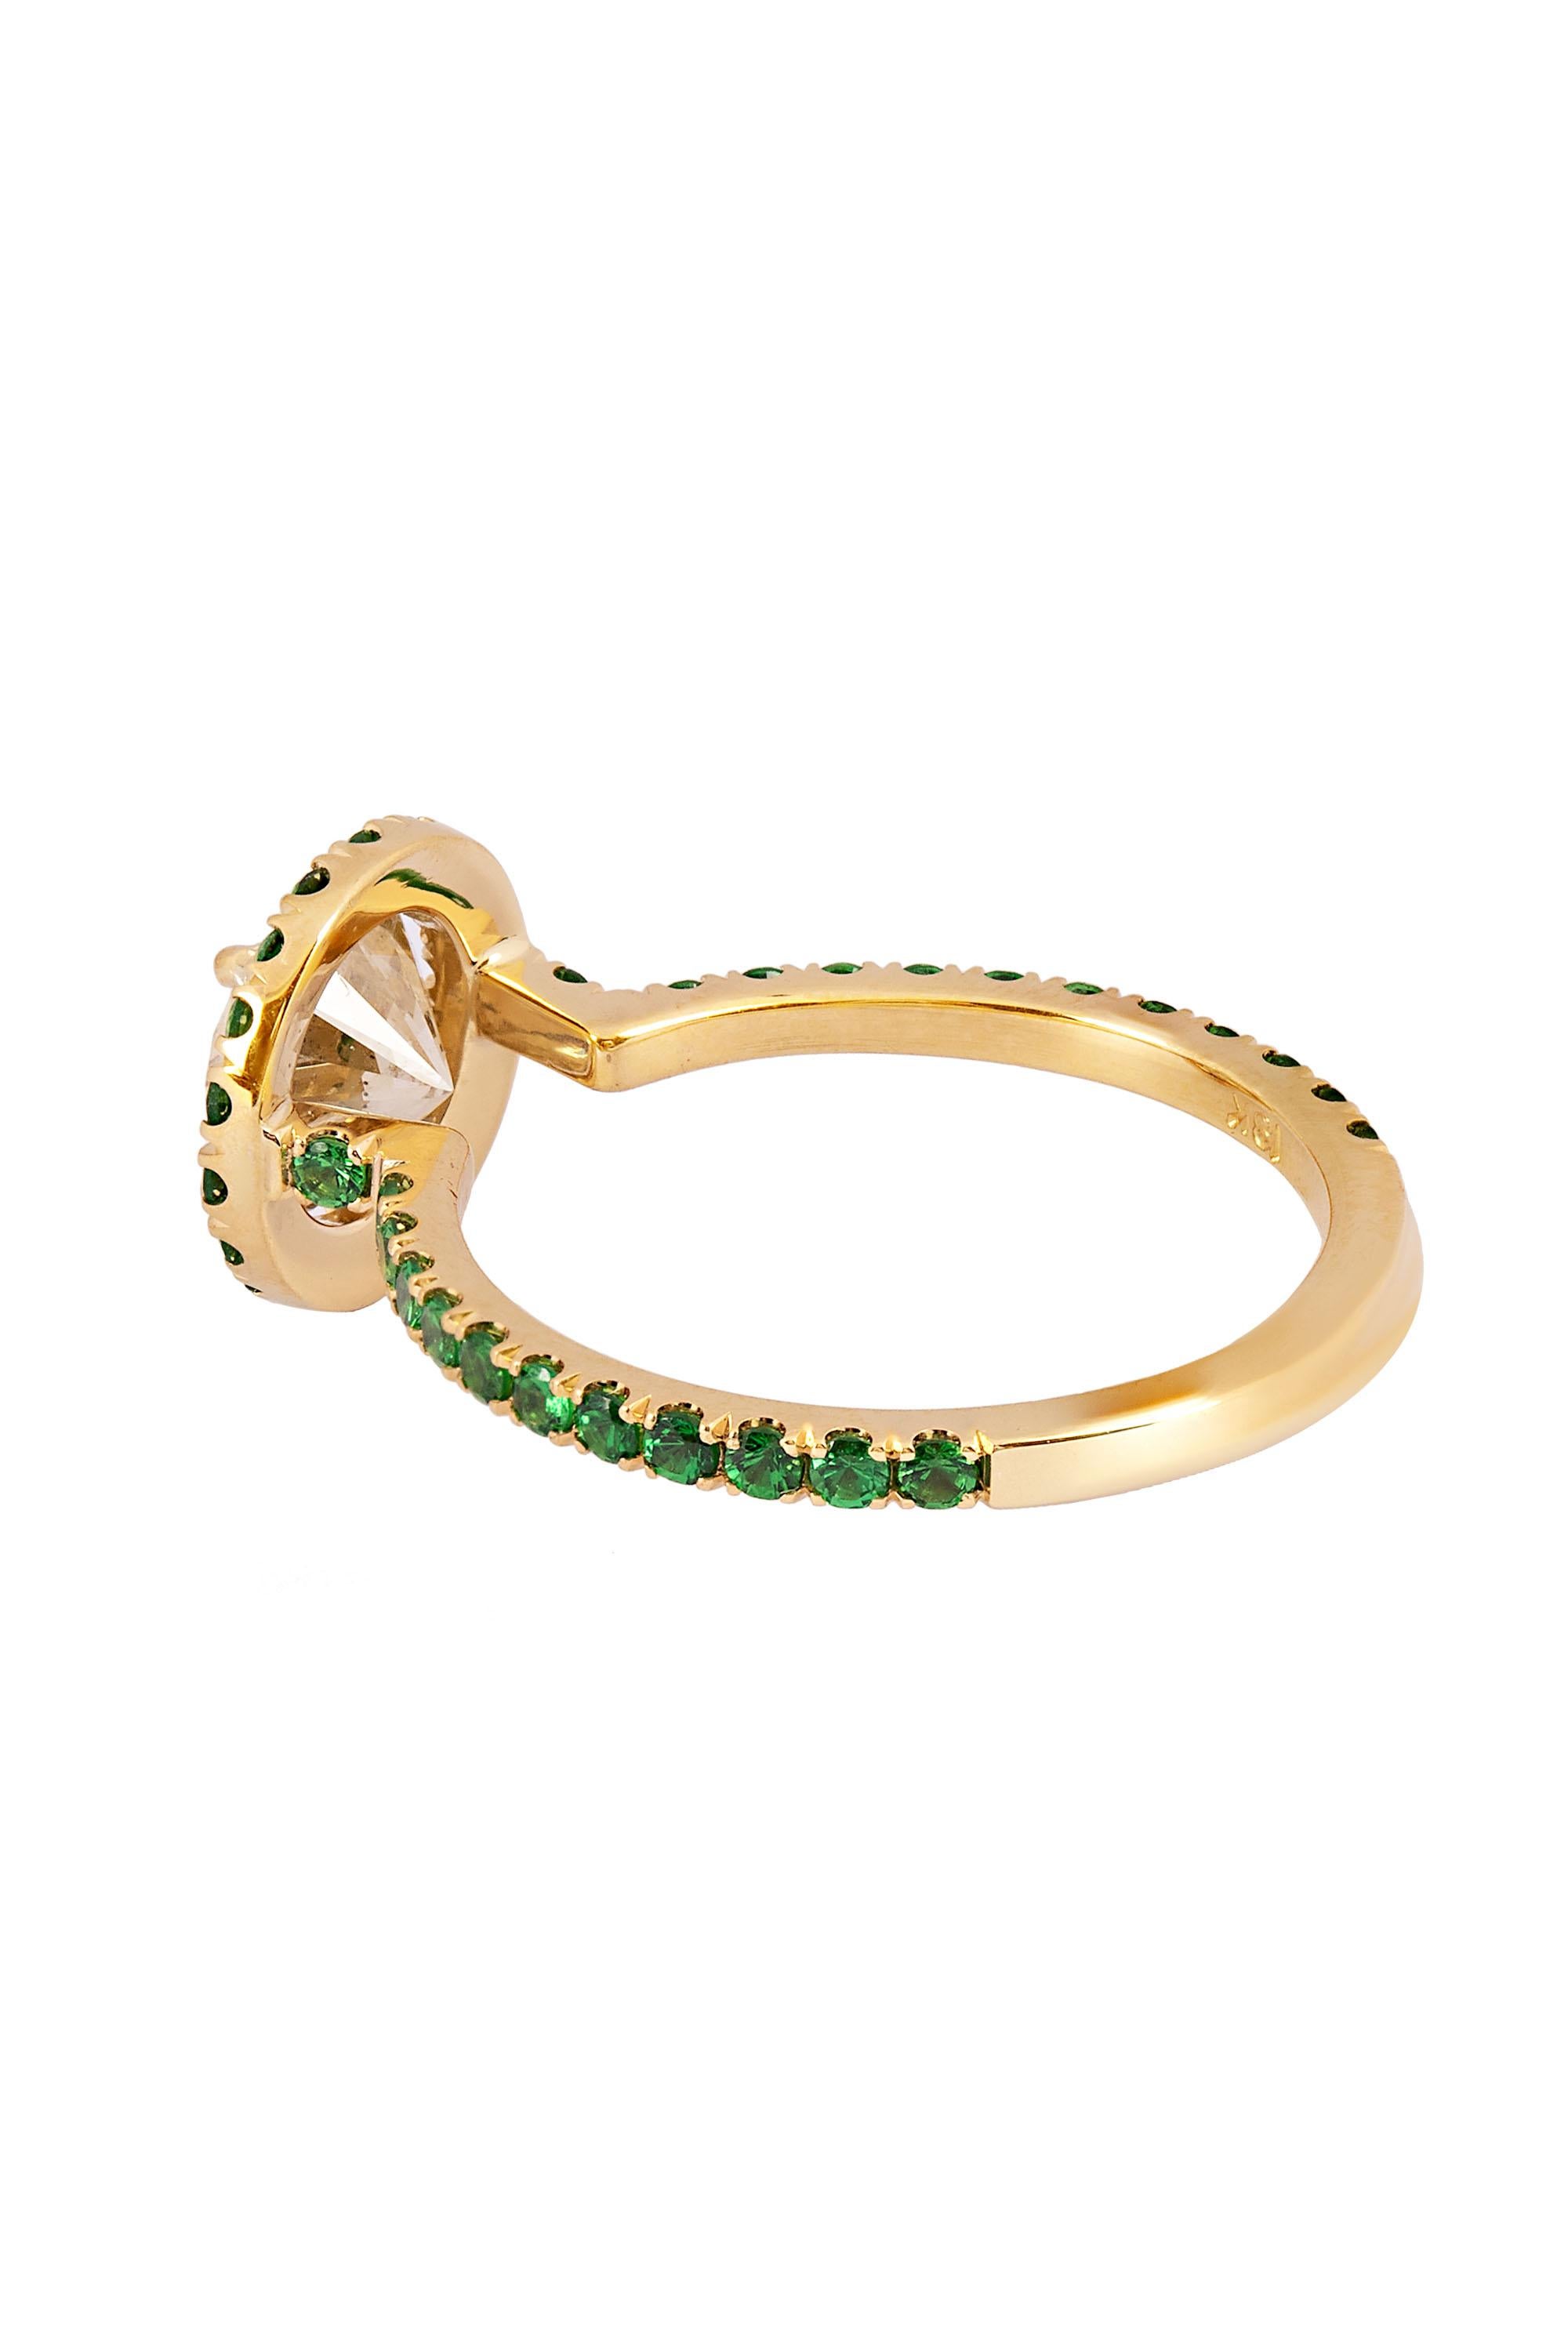 Designed and created by Gems Are Forever, Inc. Beverly Hills, this gleaming round brilliant diamond weighing 1.33 carats radiates from within a halo of round brilliant cut bright green tsavorite garnet which further accent the ring shoulders in this